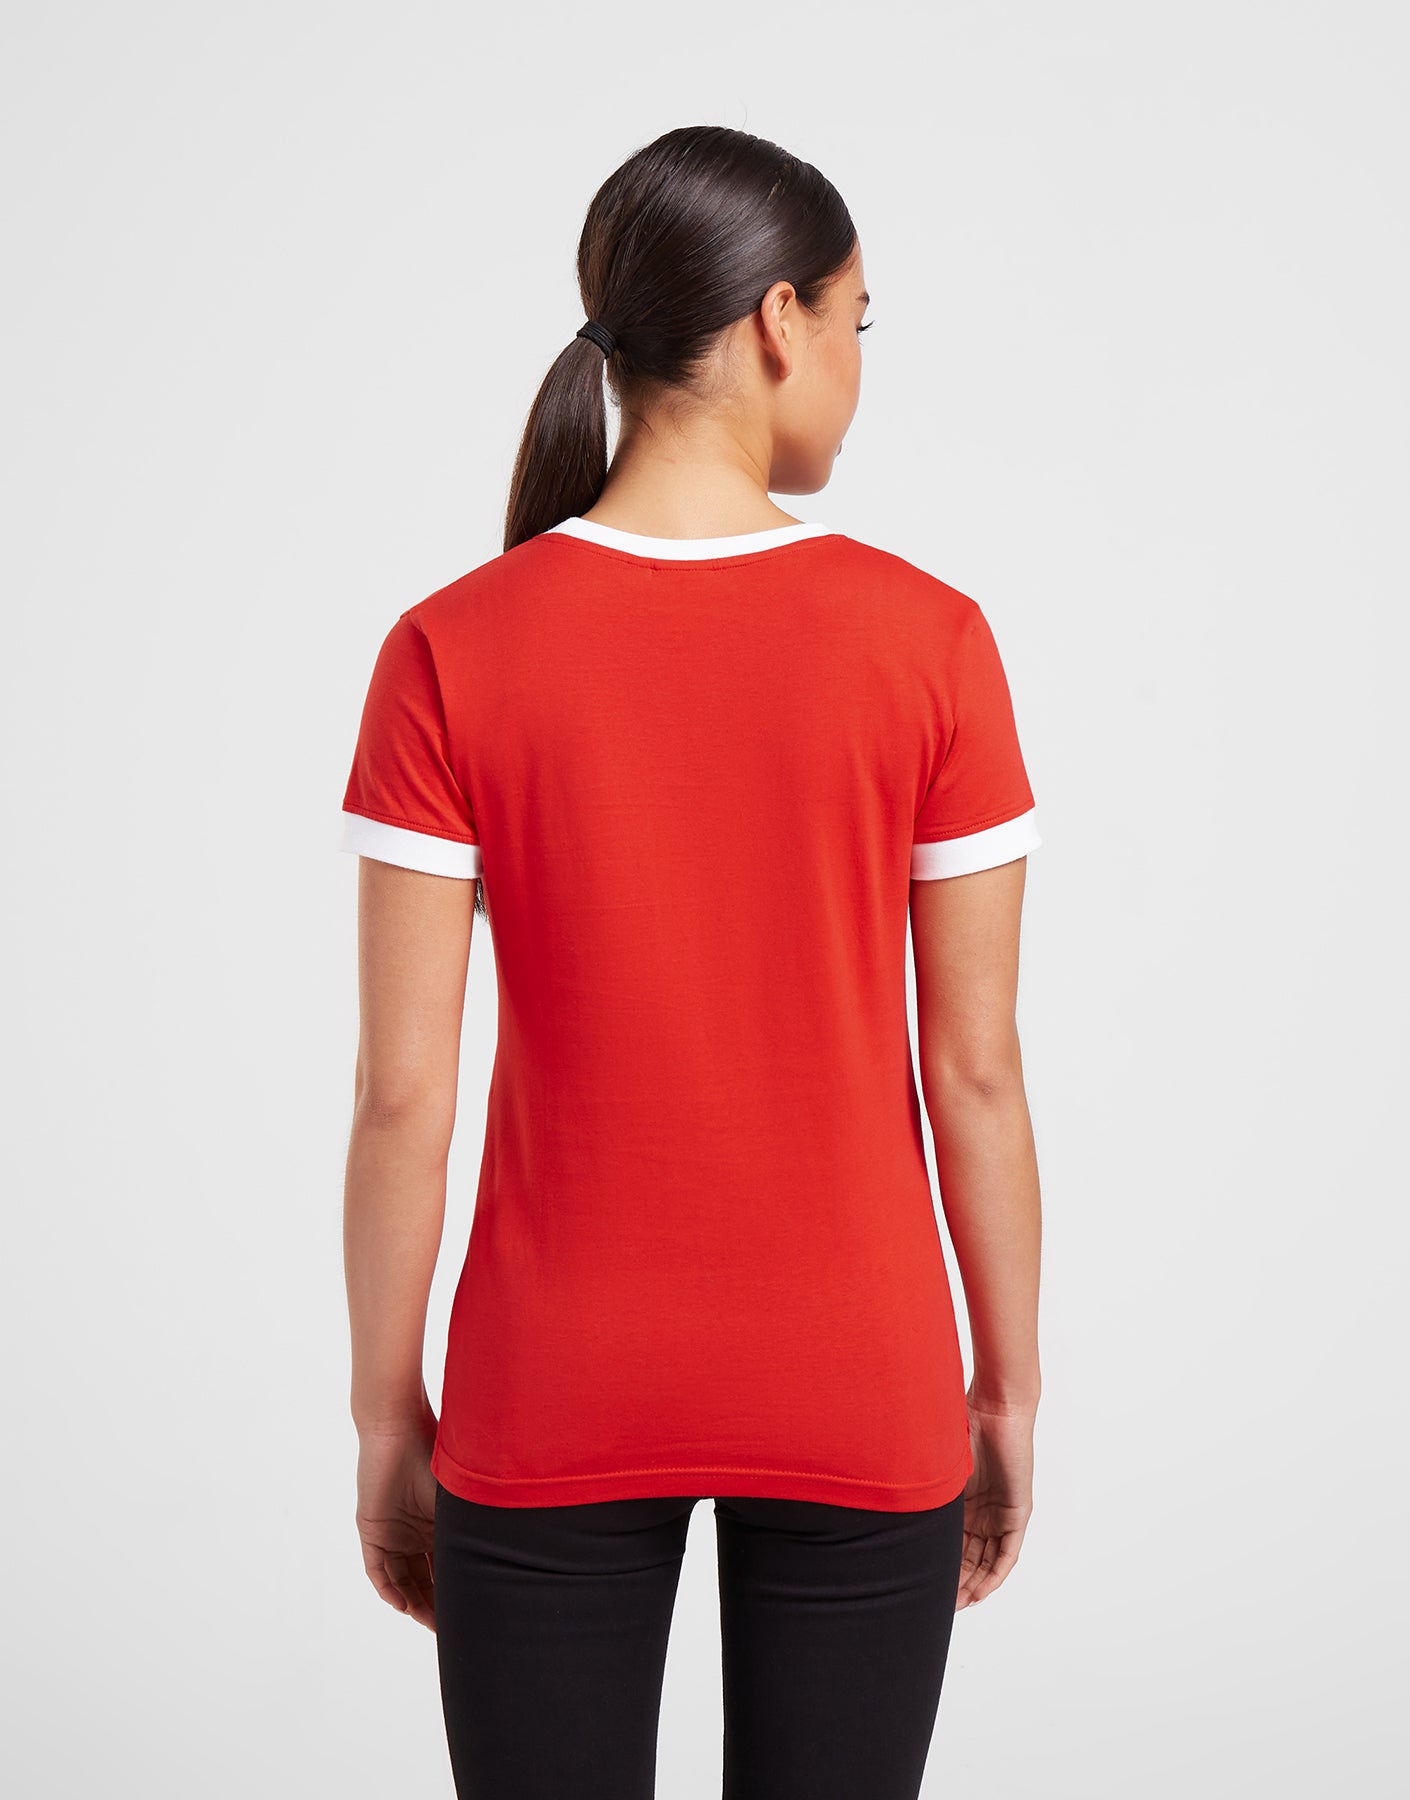 Official Team Wales Women's Ringer T-Shirt - The World Football Store